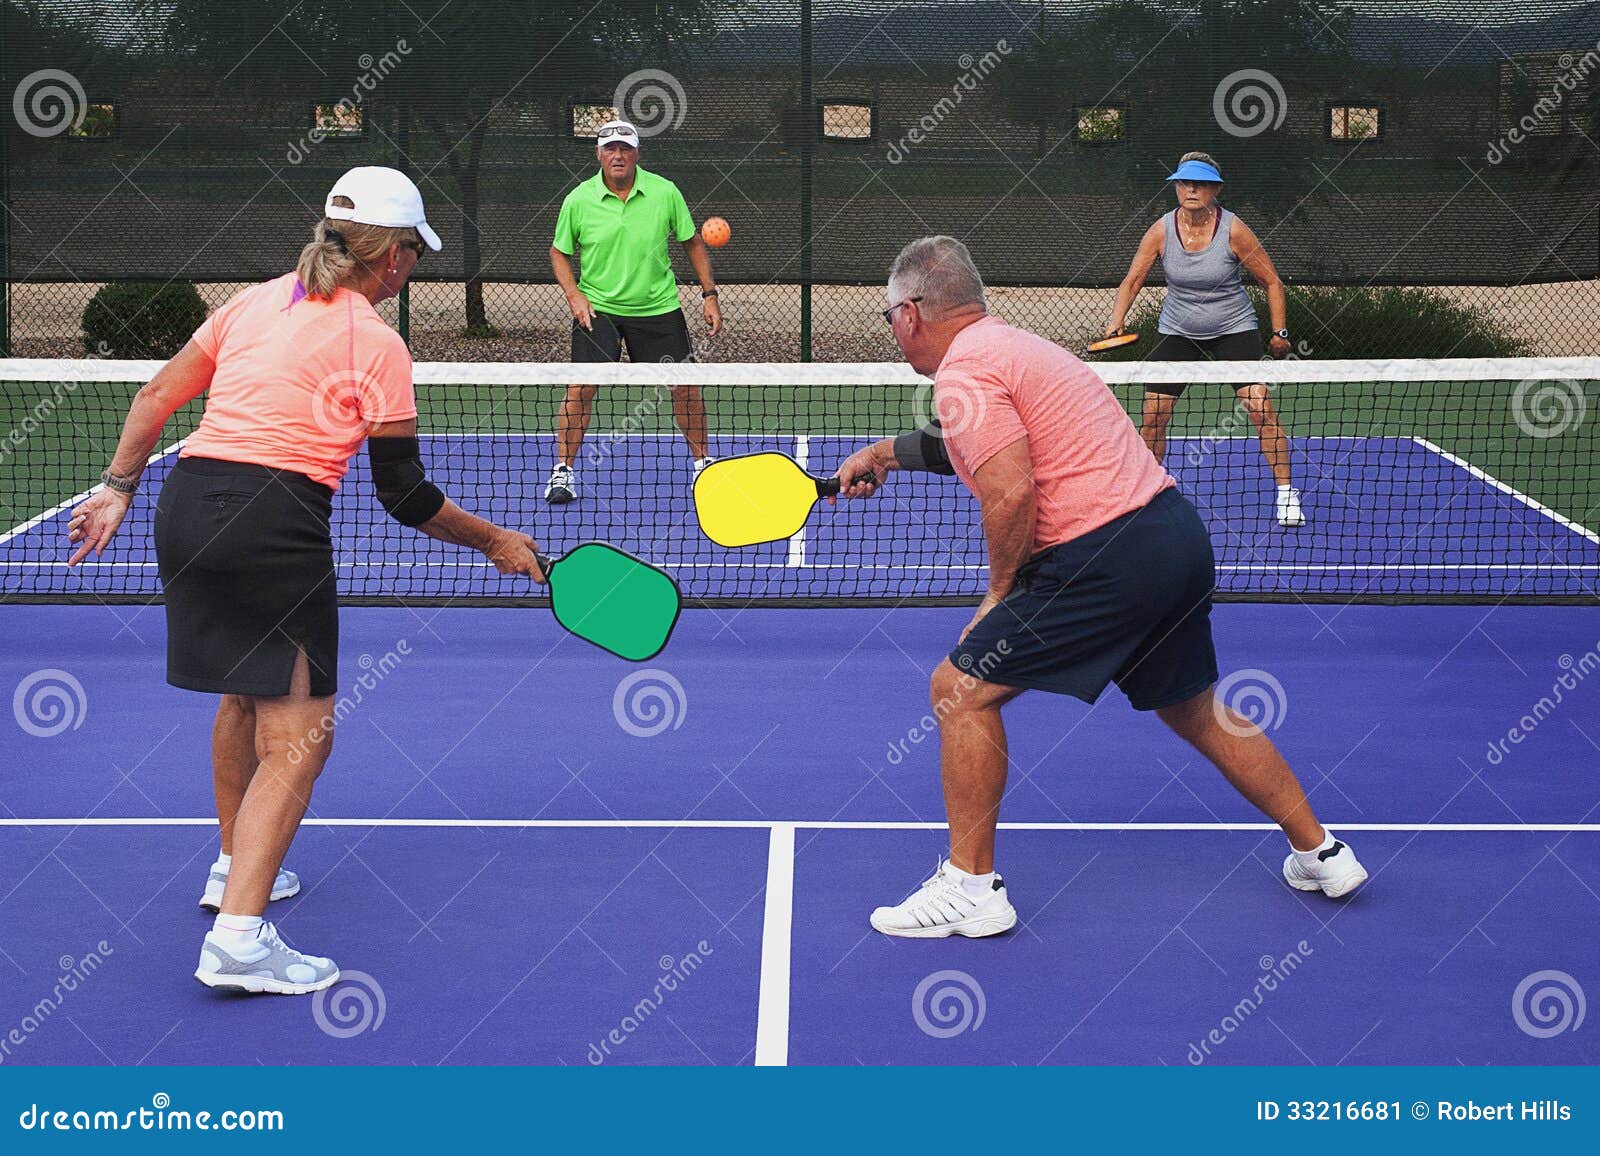 pickleball action - mixed doubles 2